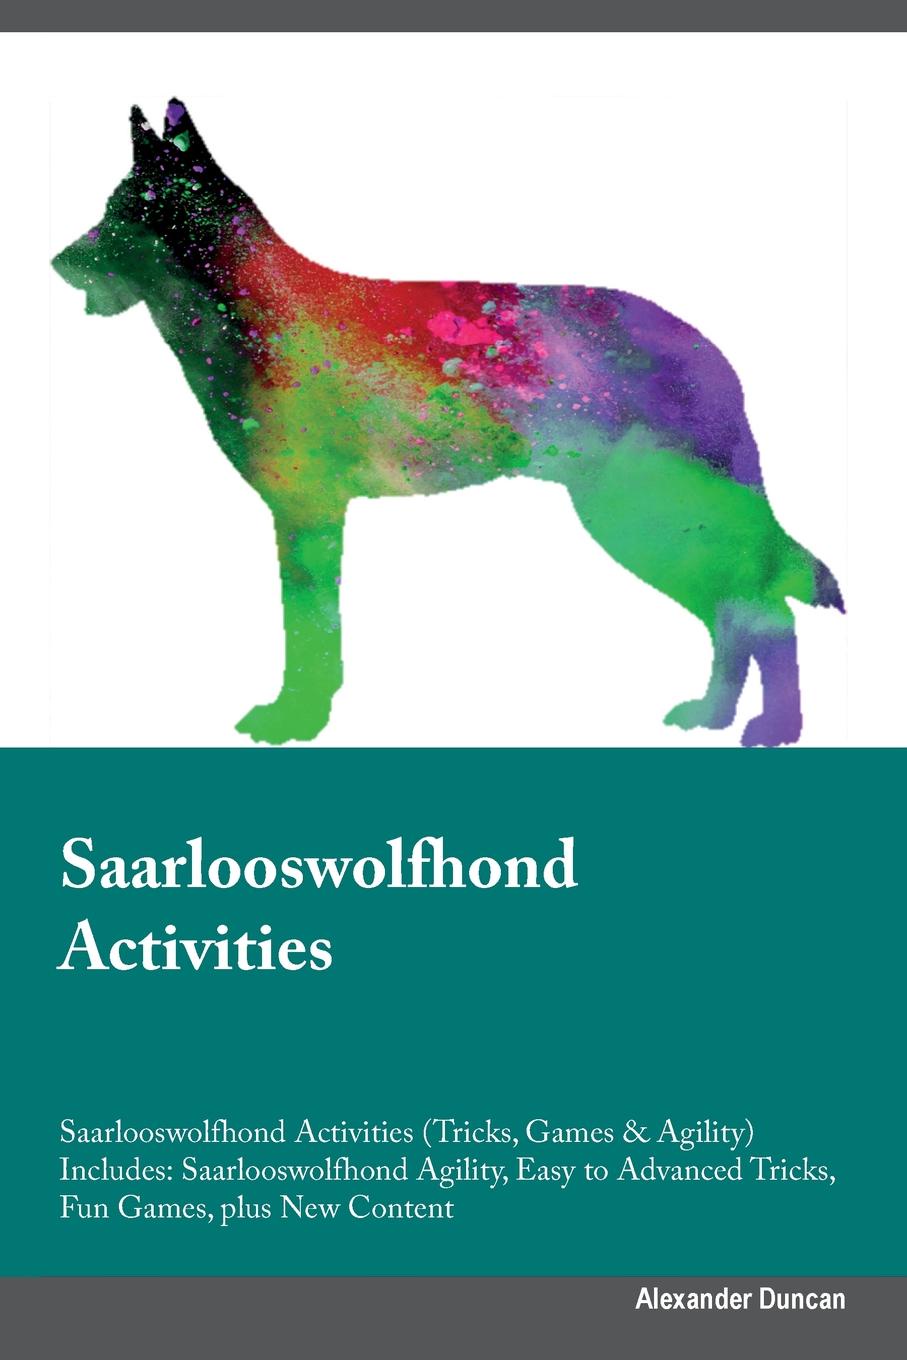 Saarlooswolfhond Activities Saarlooswolfhond Activities (Tricks, Games & Agility) Includes. Saarlooswolfhond Agility, Easy to Advanced Tricks, Fun Games, plus New Content